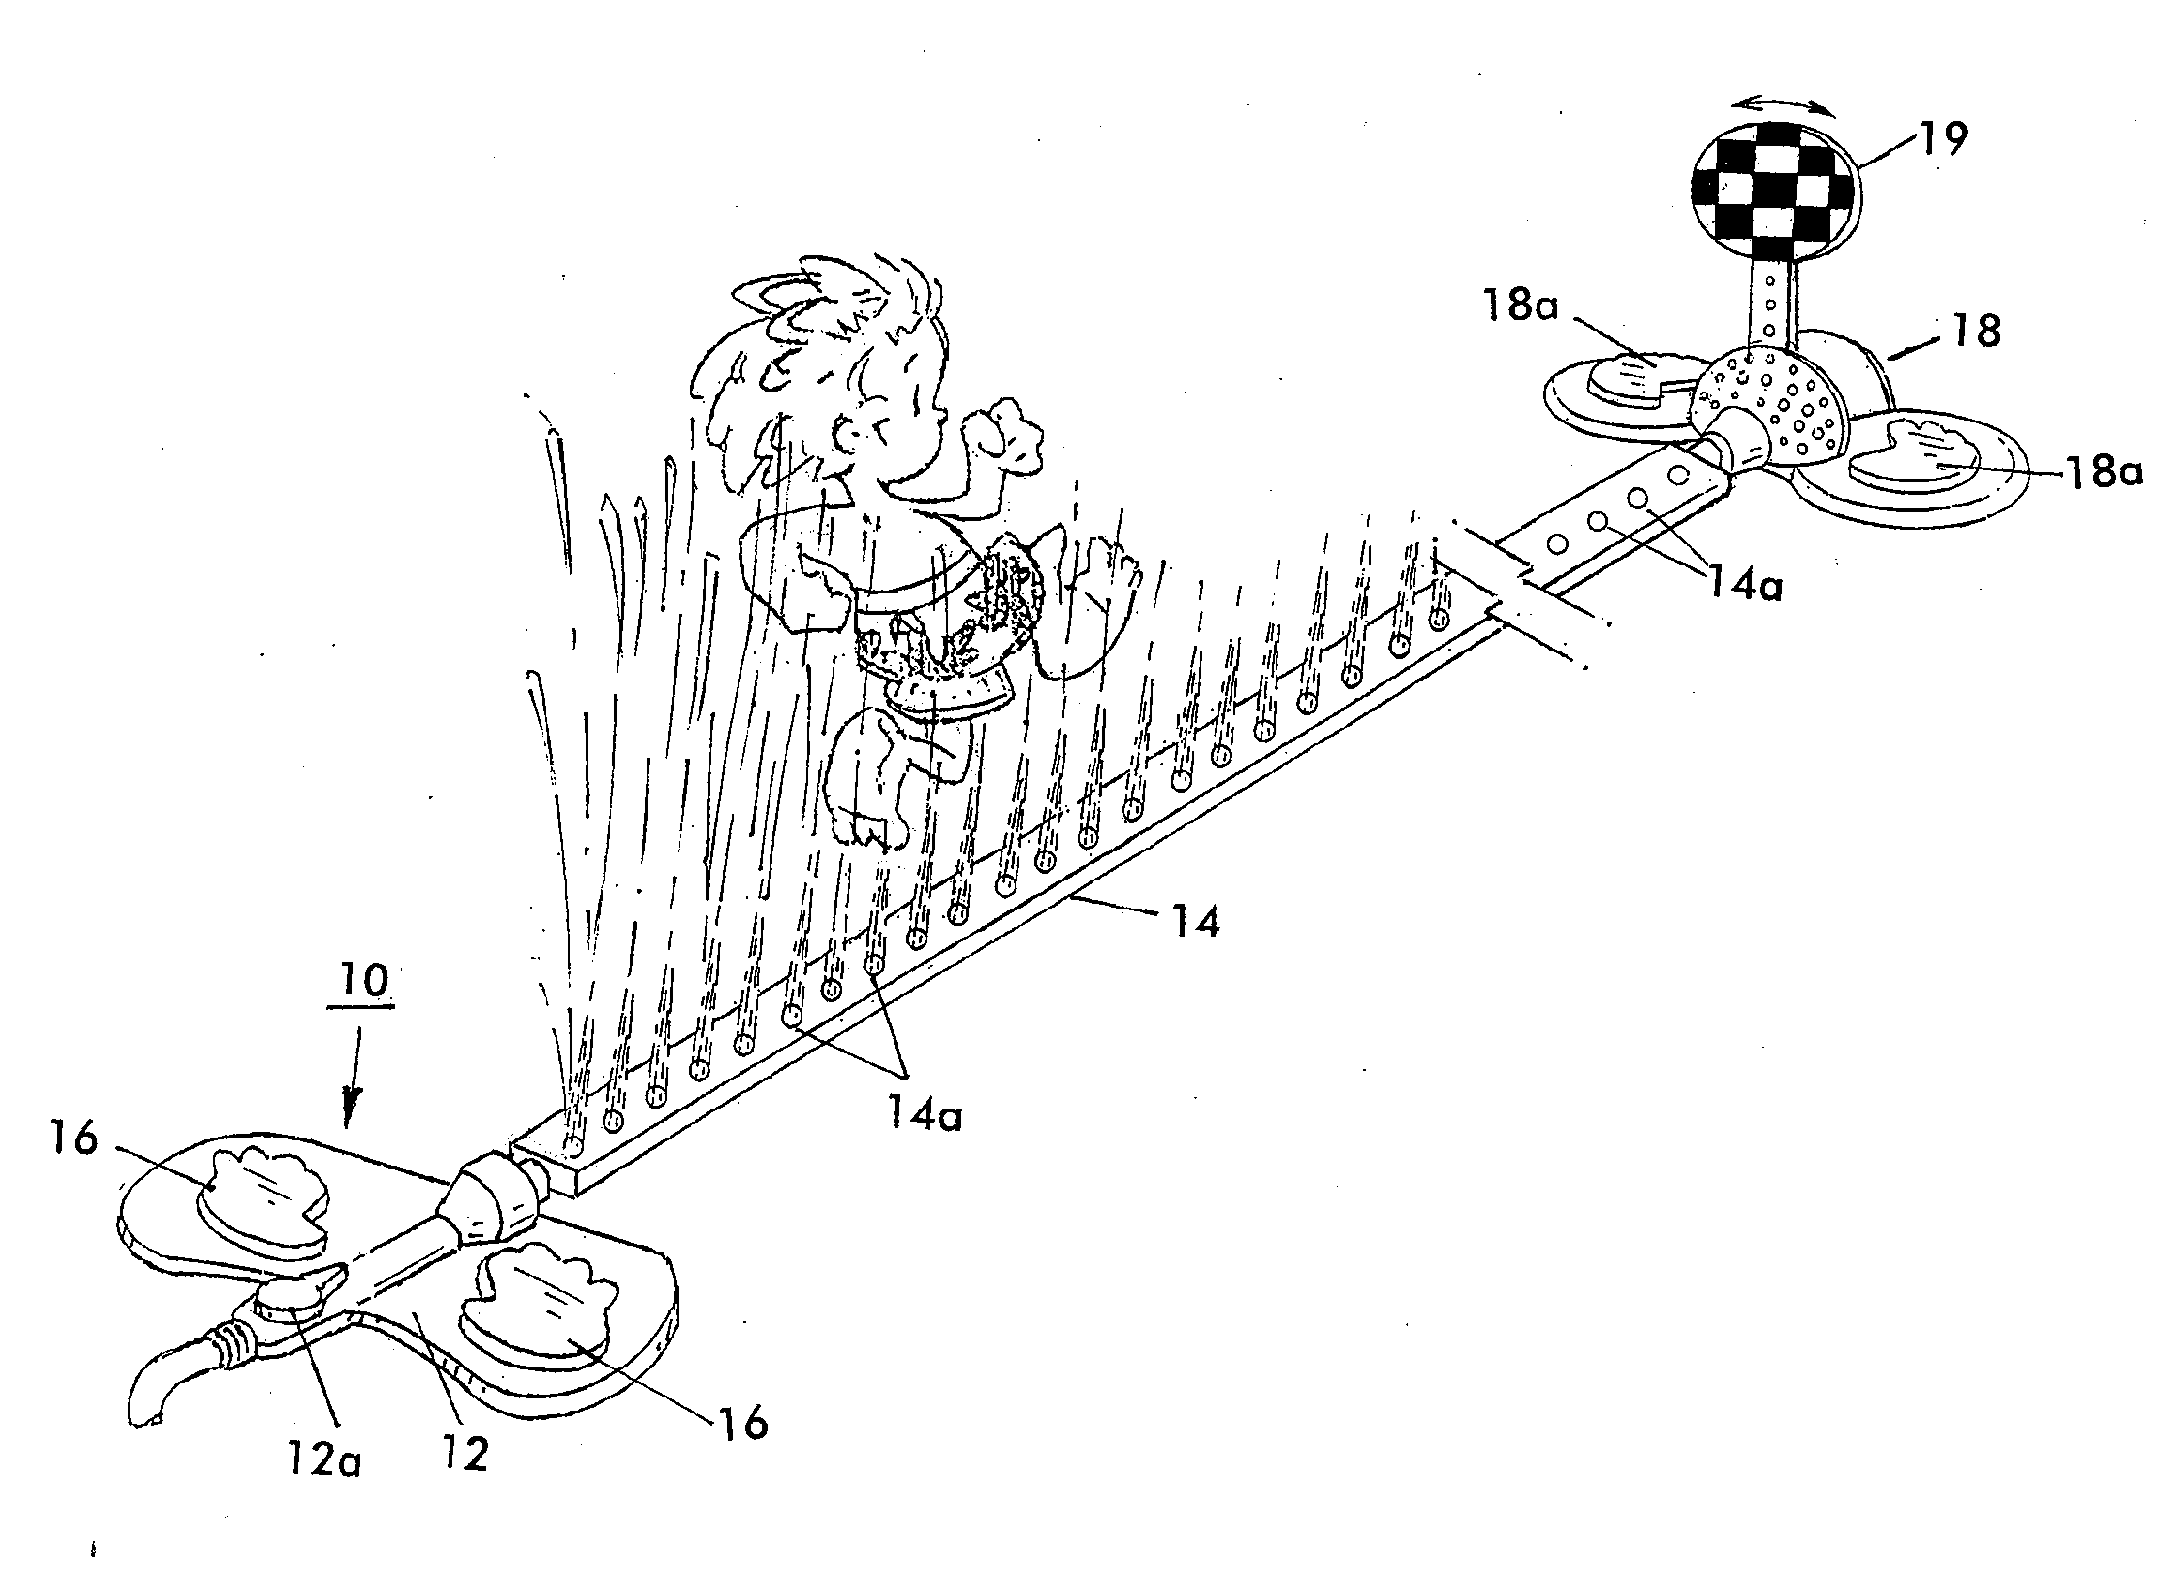 Water device for use in a water game